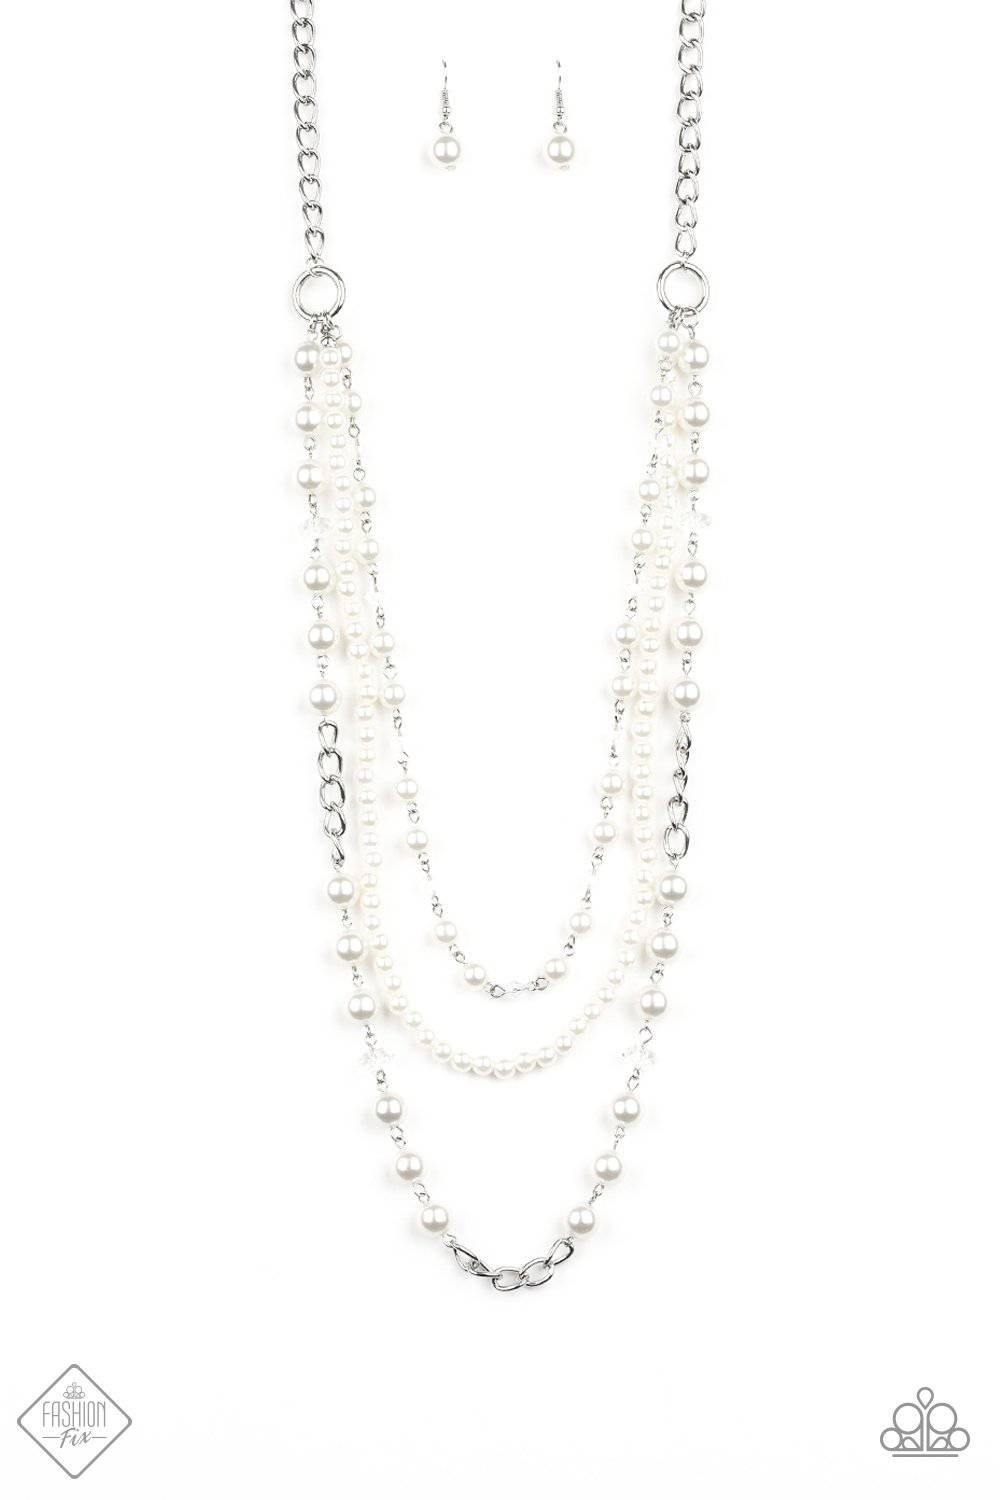 New York City Chic - Pearl Necklace - Paparazzi Accessories - GlaMarous Titi Jewels